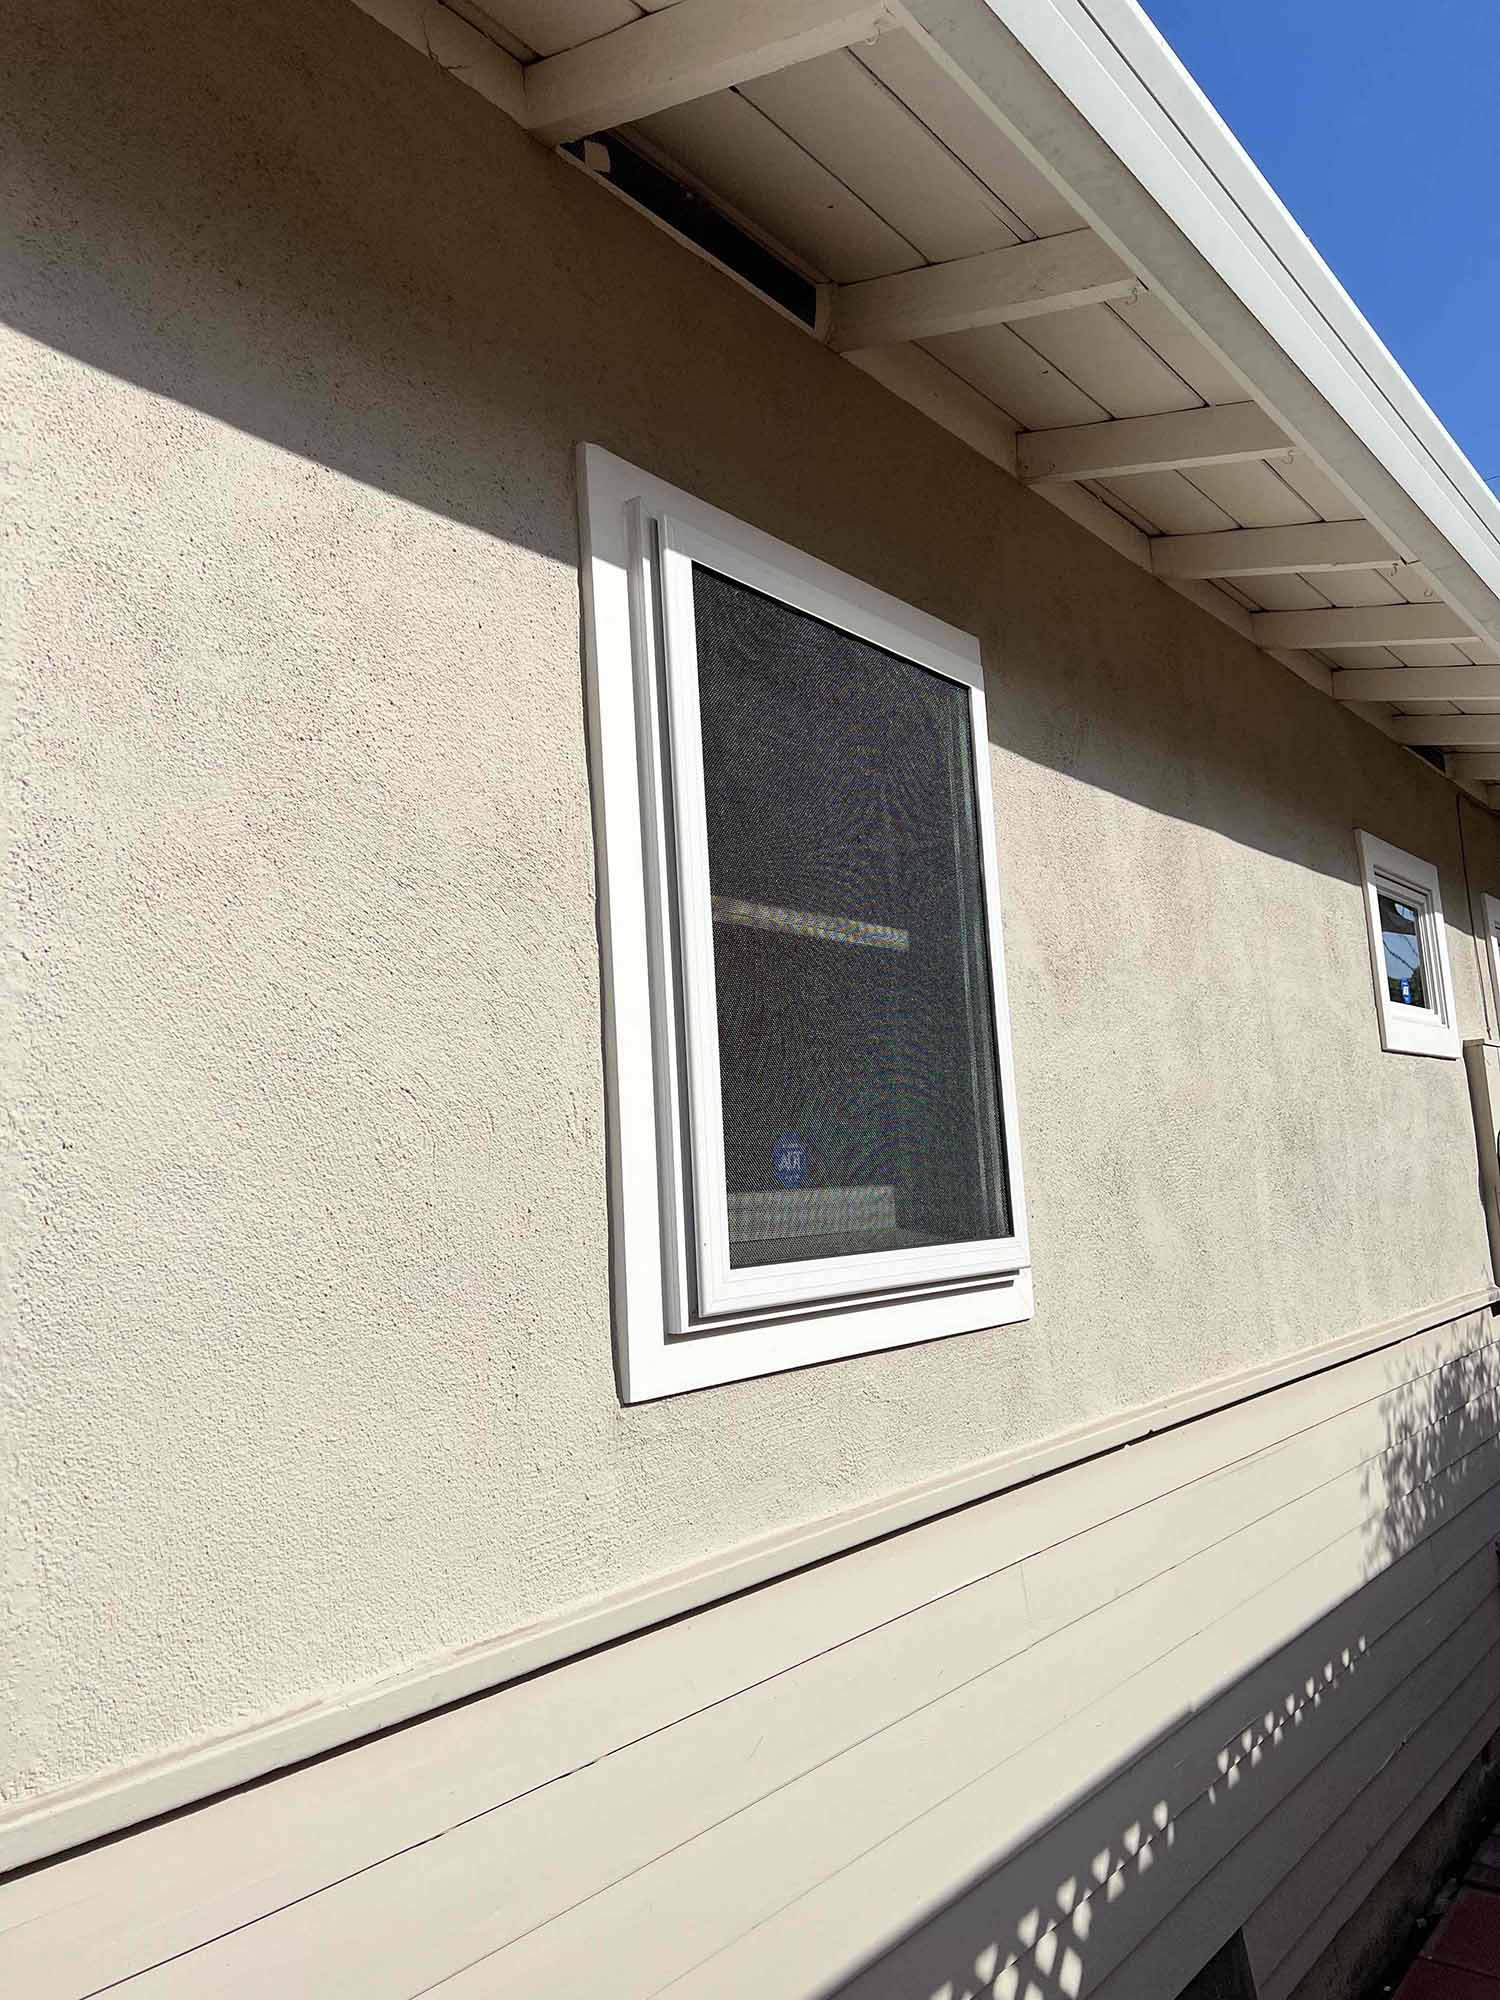 Safety Window Film for Sunnyvale, CA Homes. Installed by ClimatePro.